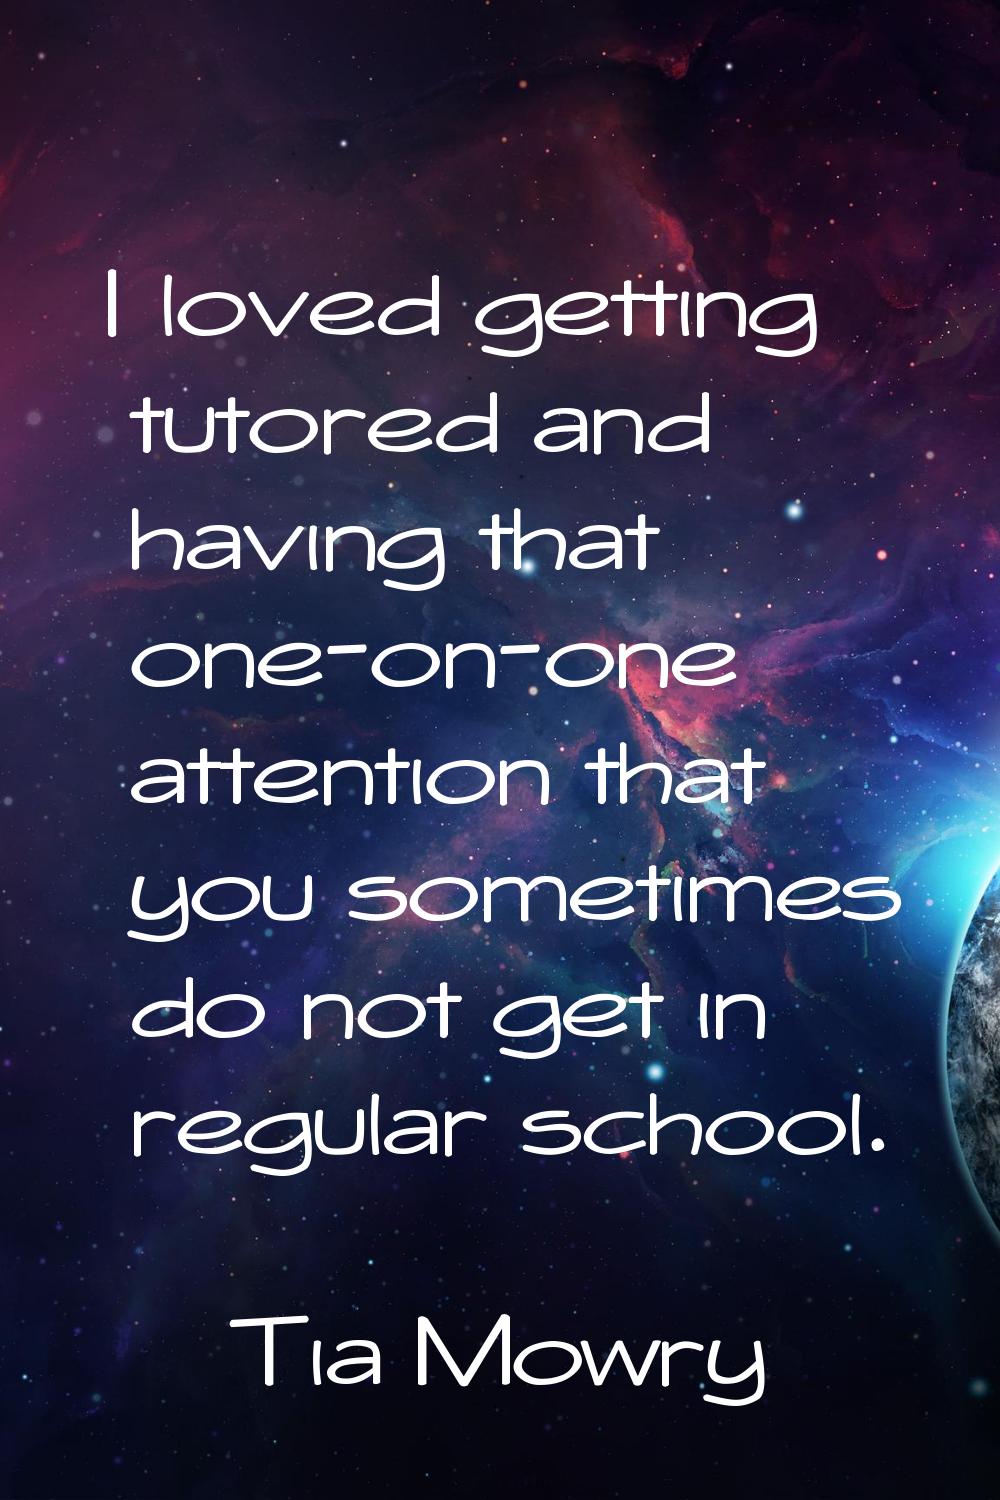 I loved getting tutored and having that one-on-one attention that you sometimes do not get in regul